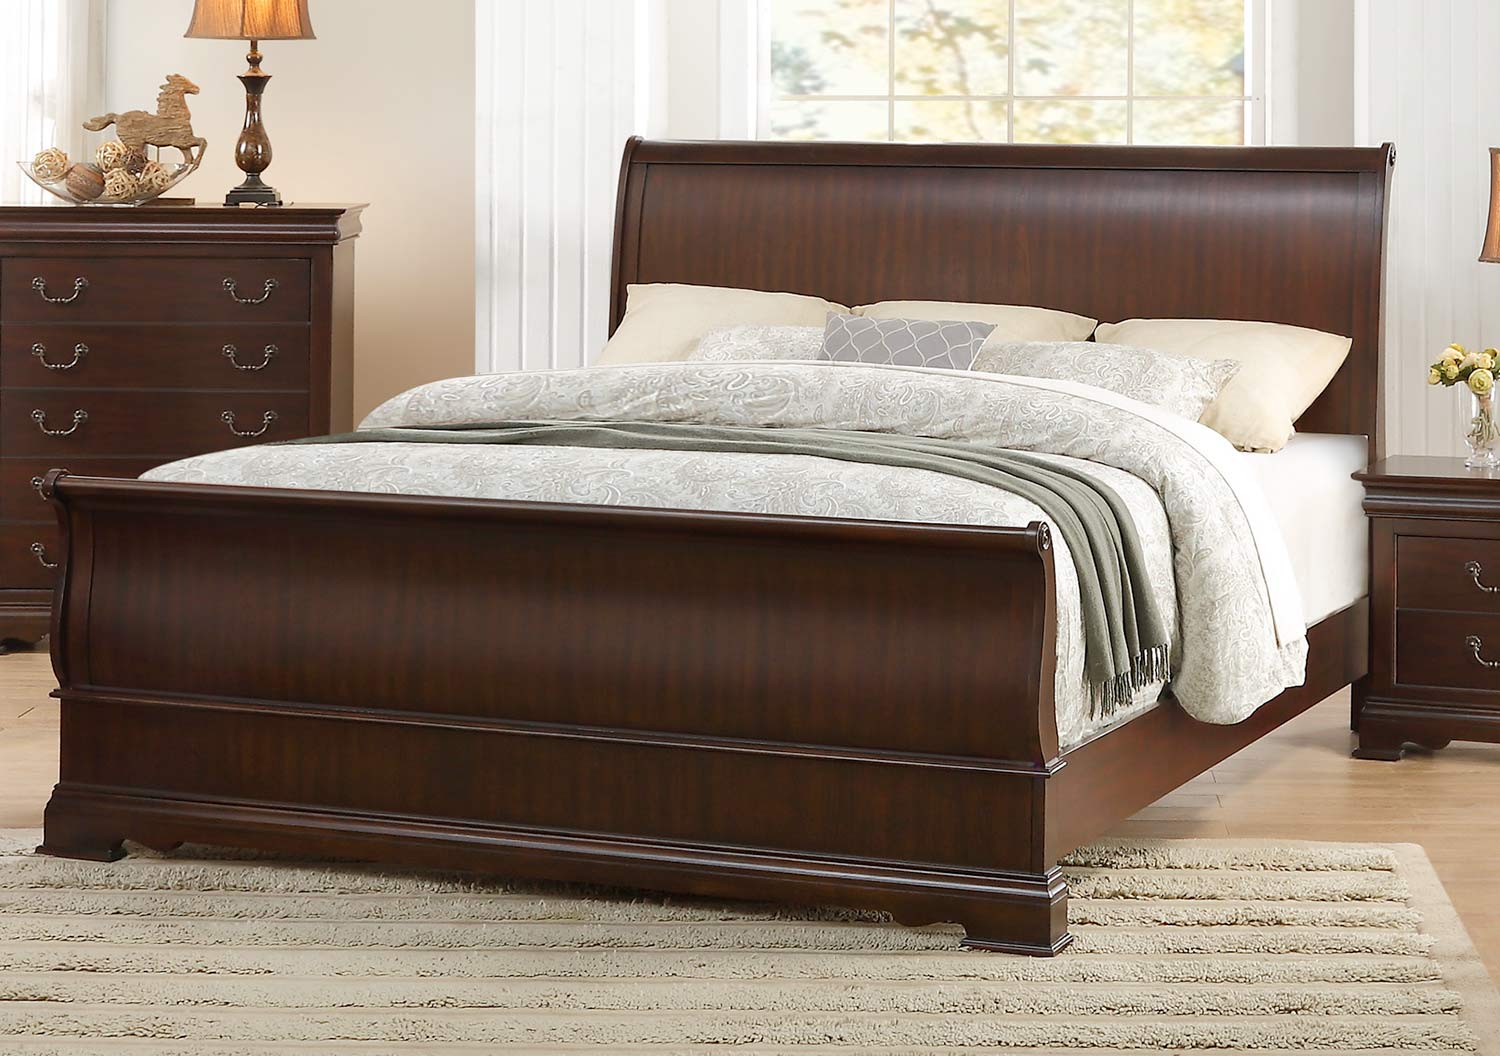 Homelegance Clematis Sleigh Bed - Cherry